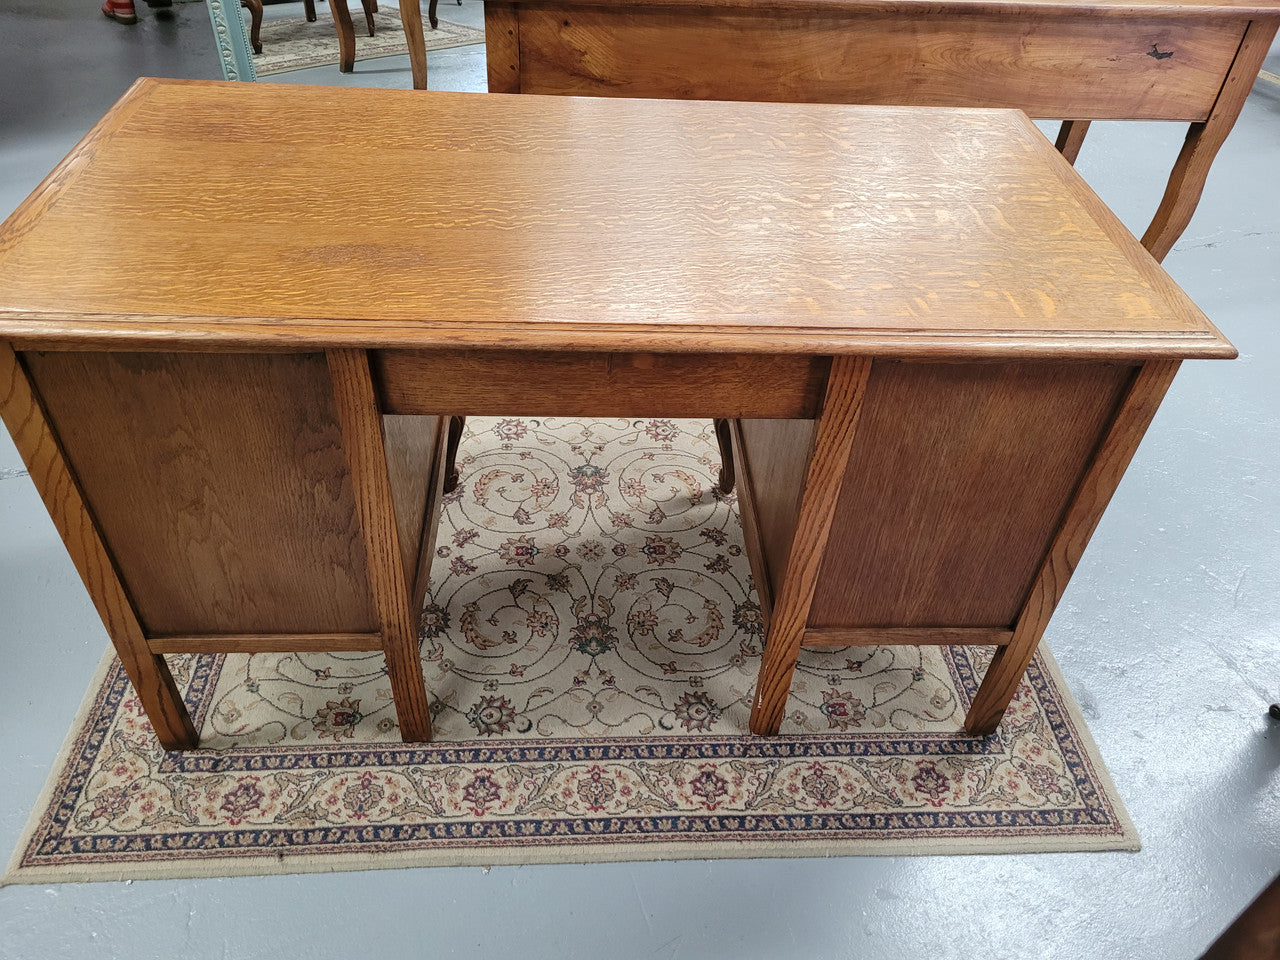 Beautifully carved French oak small desk with three drawers and a cupboard for all your storage needs. In good original condition. Great size for small spaces.